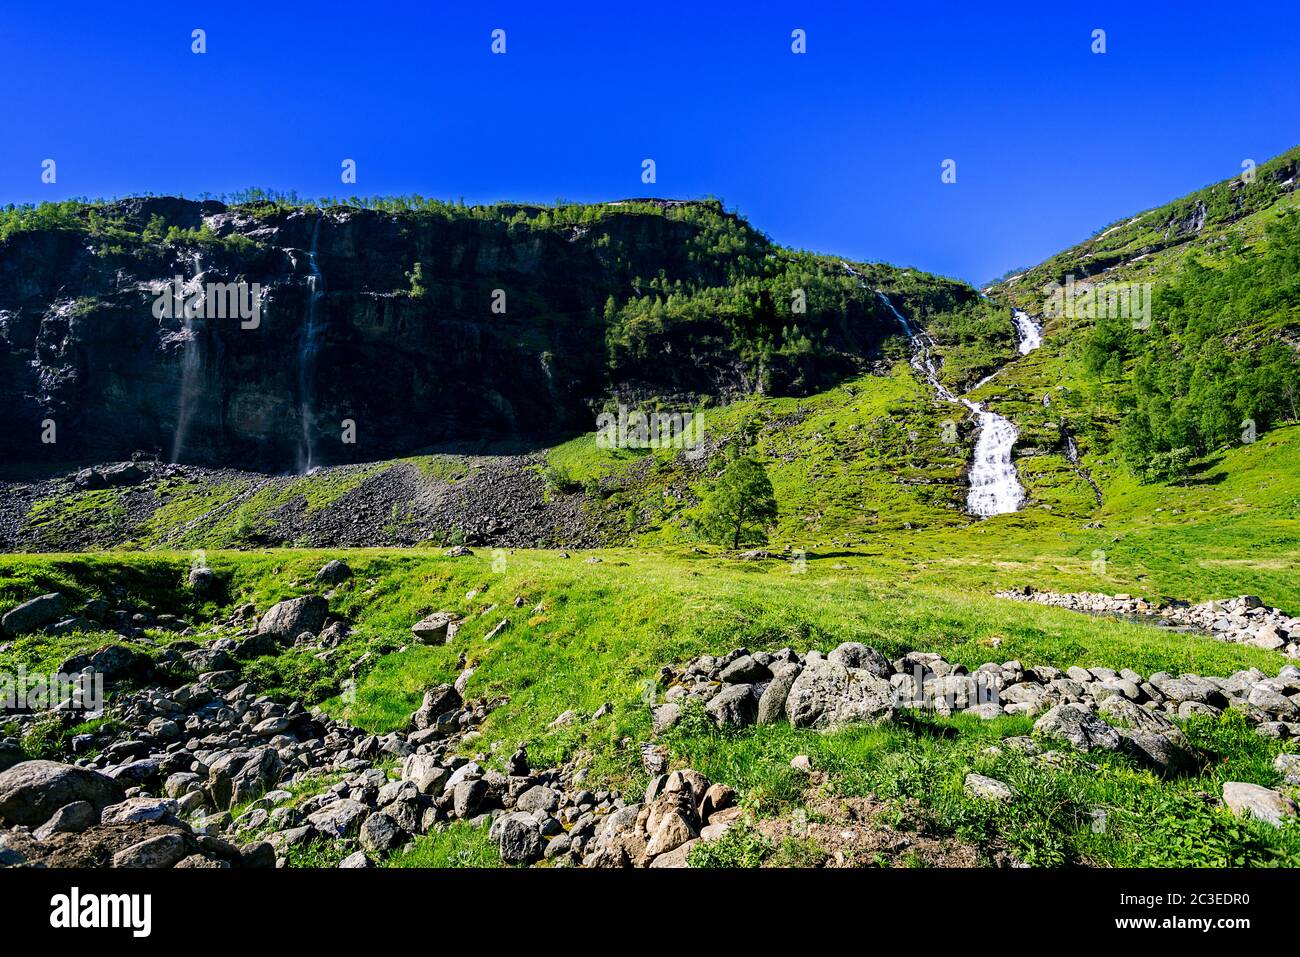 landscape with waterfall Stock Photo